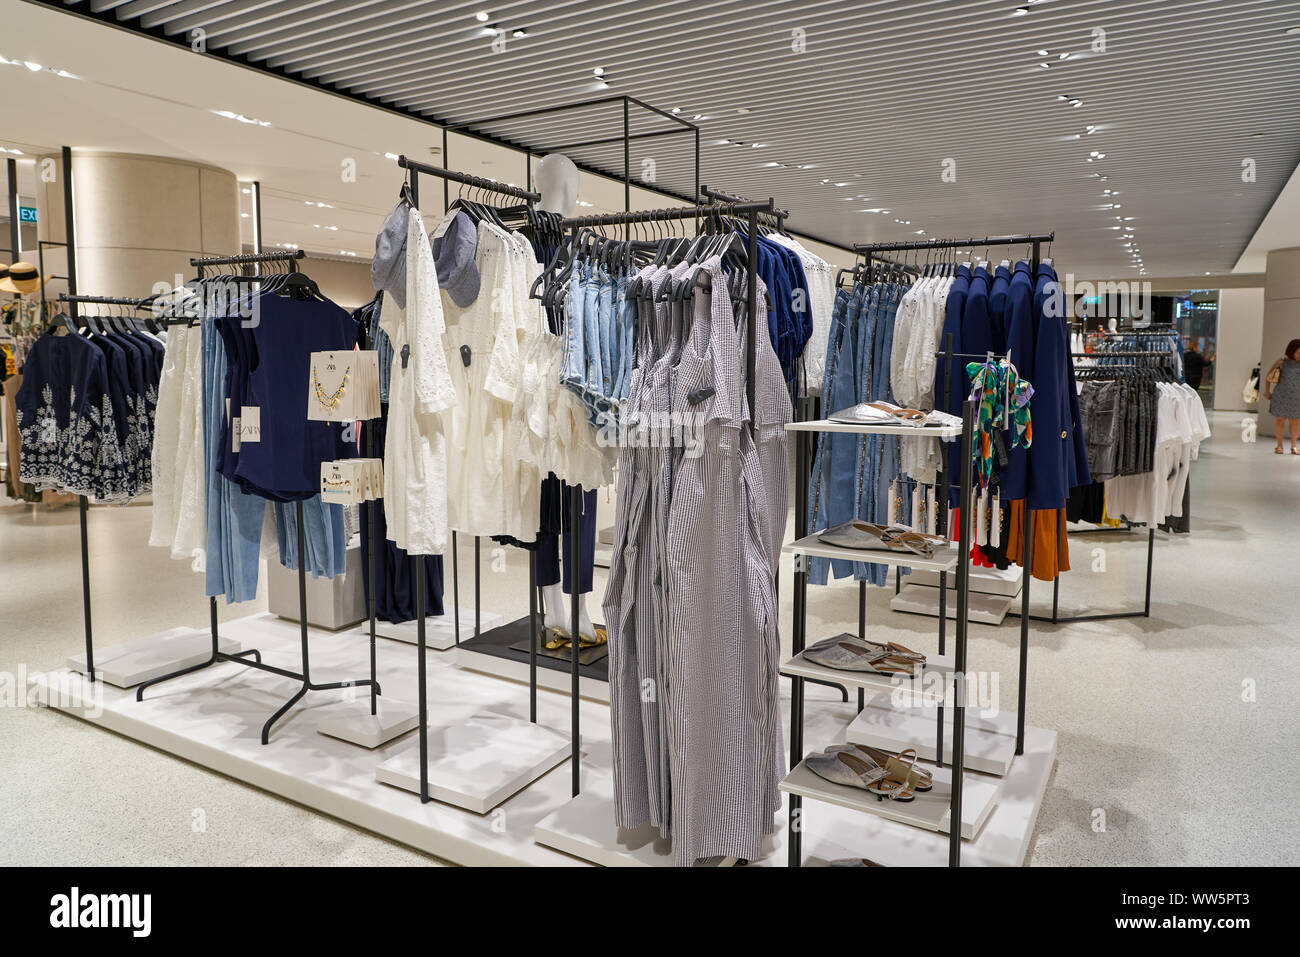 Zara Store High Resolution Stock Photography and Images - Alamy